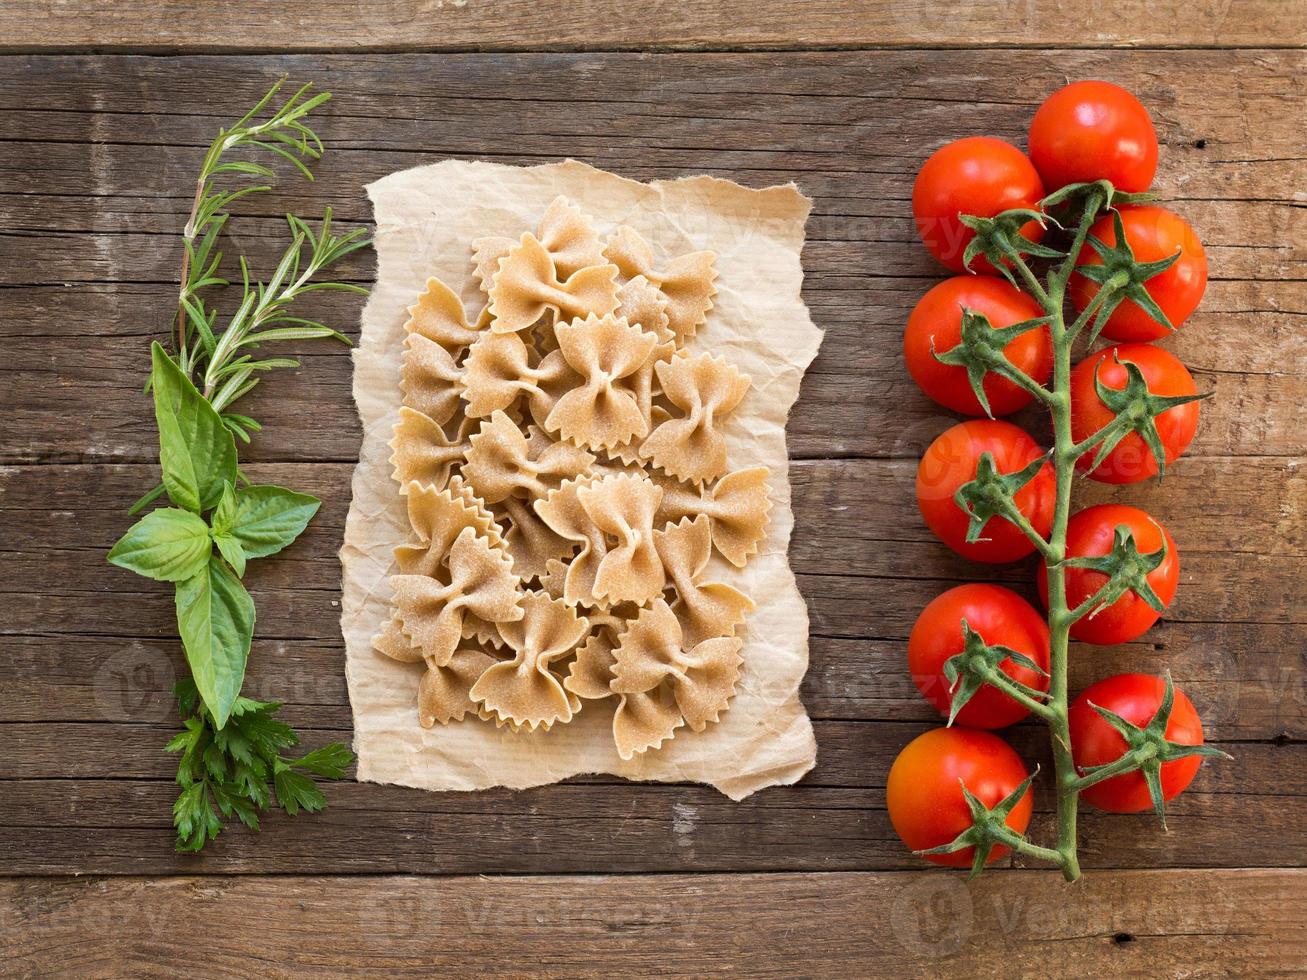 Pasta, tomatoes and herbs on wooden background photo